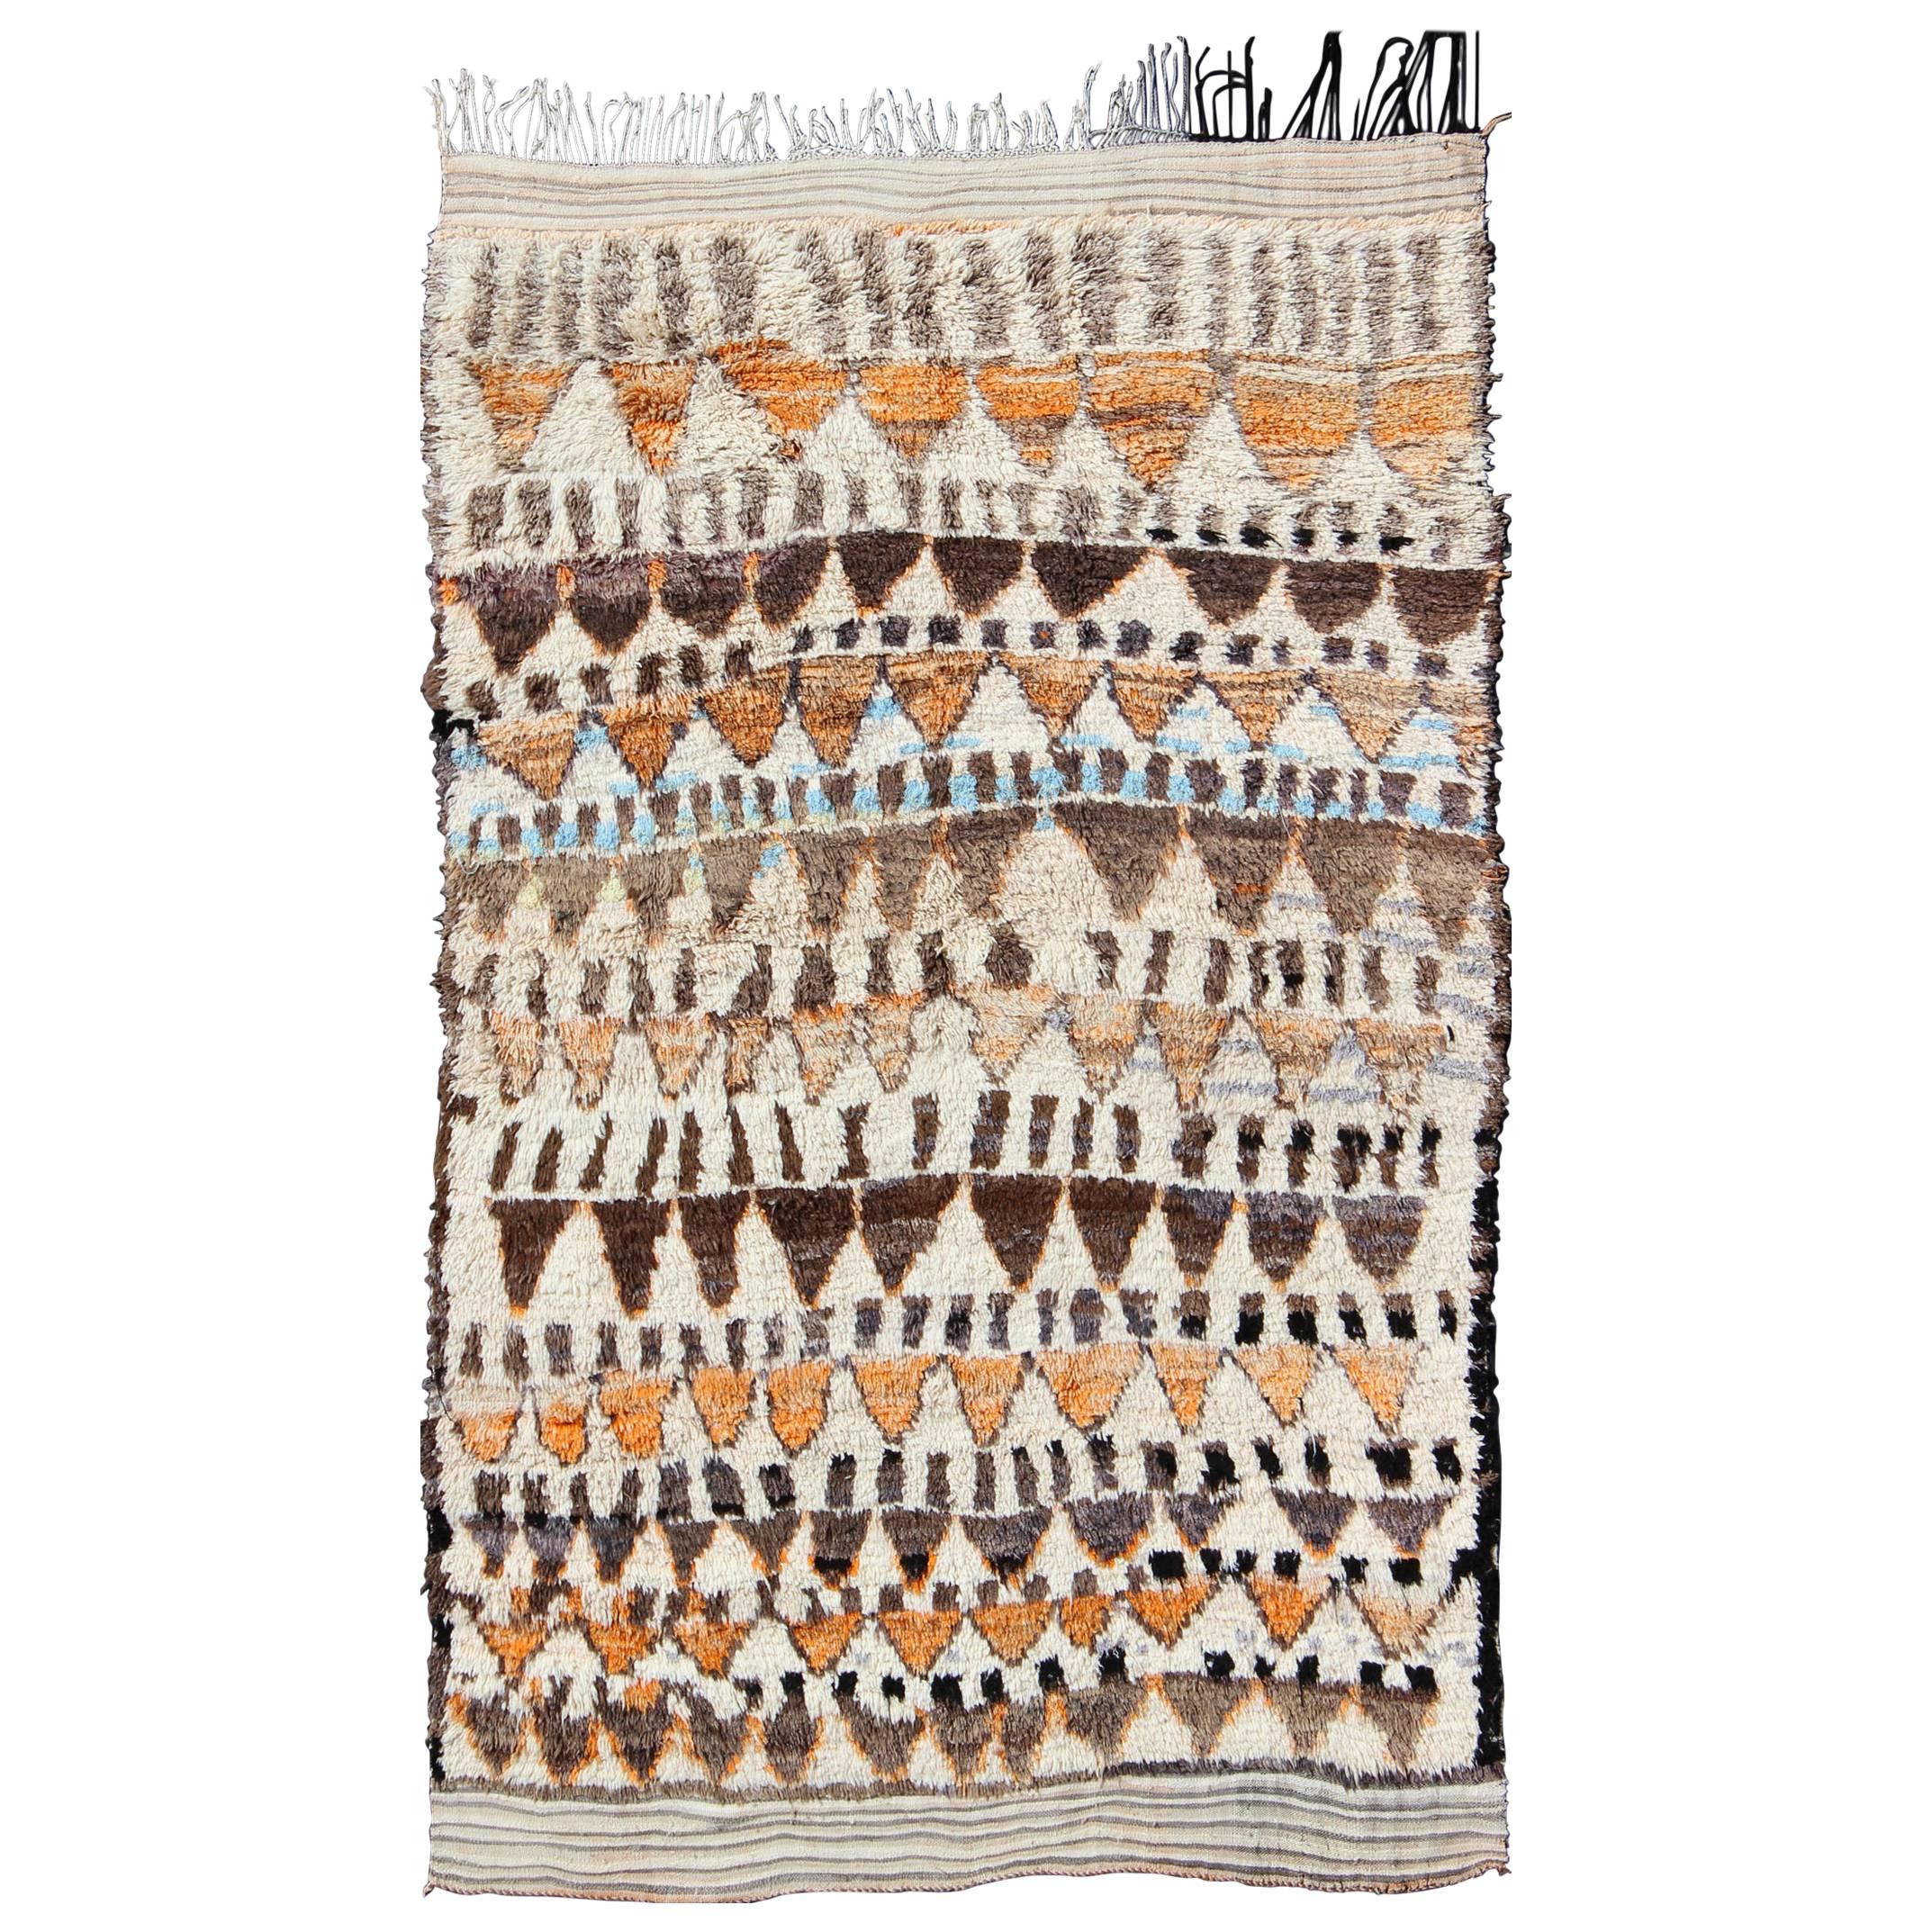 Vintage Moroccan Azilal Rug in Natural Creams, Browns and Muted Orange For Sale